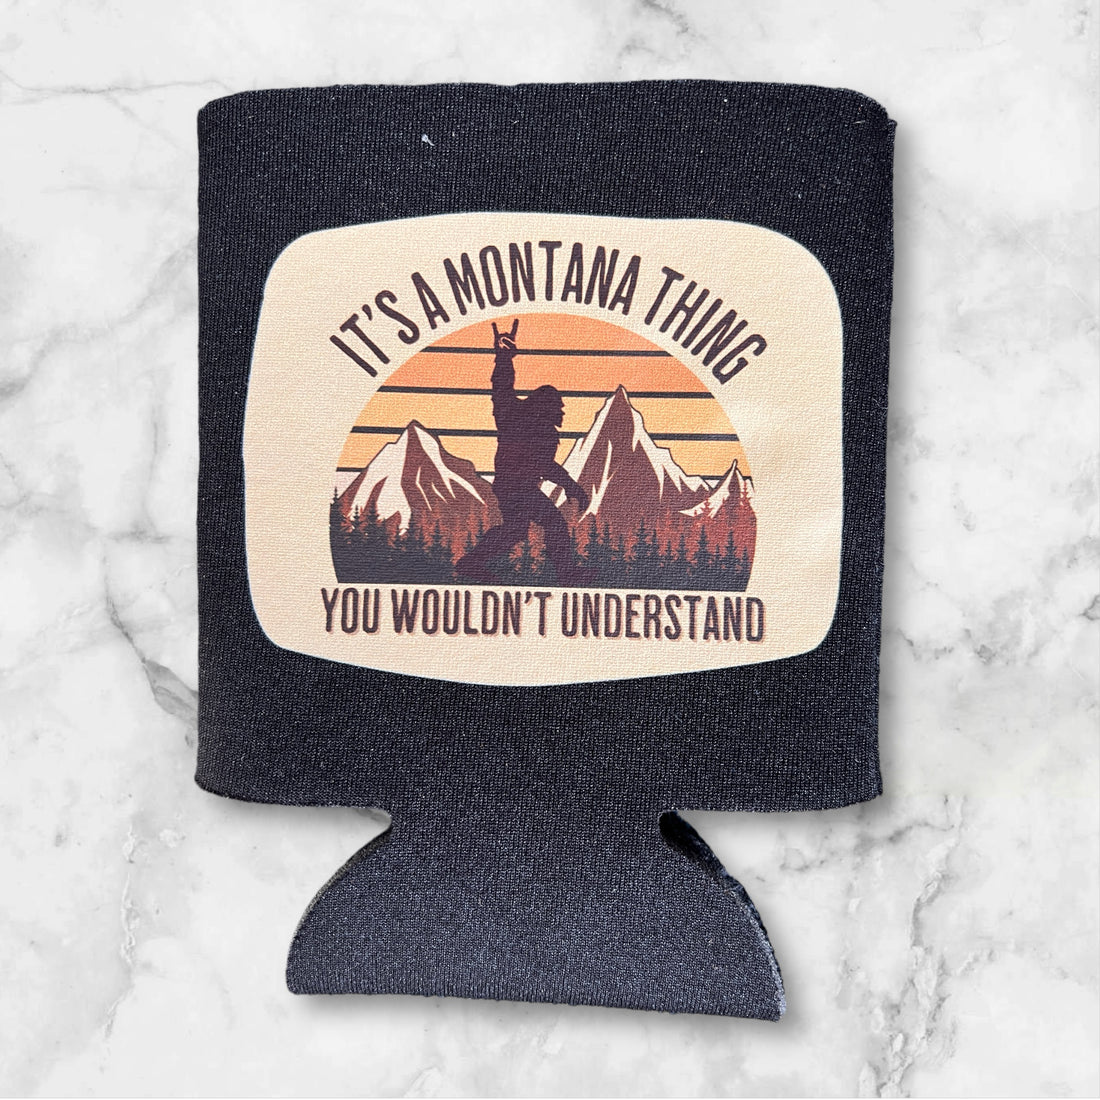  Image of the "It's a Montana Thing You Wouldn't Understand" Drink Koozie, featuring a fun slogan print, perfect for adding Montana charm to your drinkware collection while keeping beverages cool.